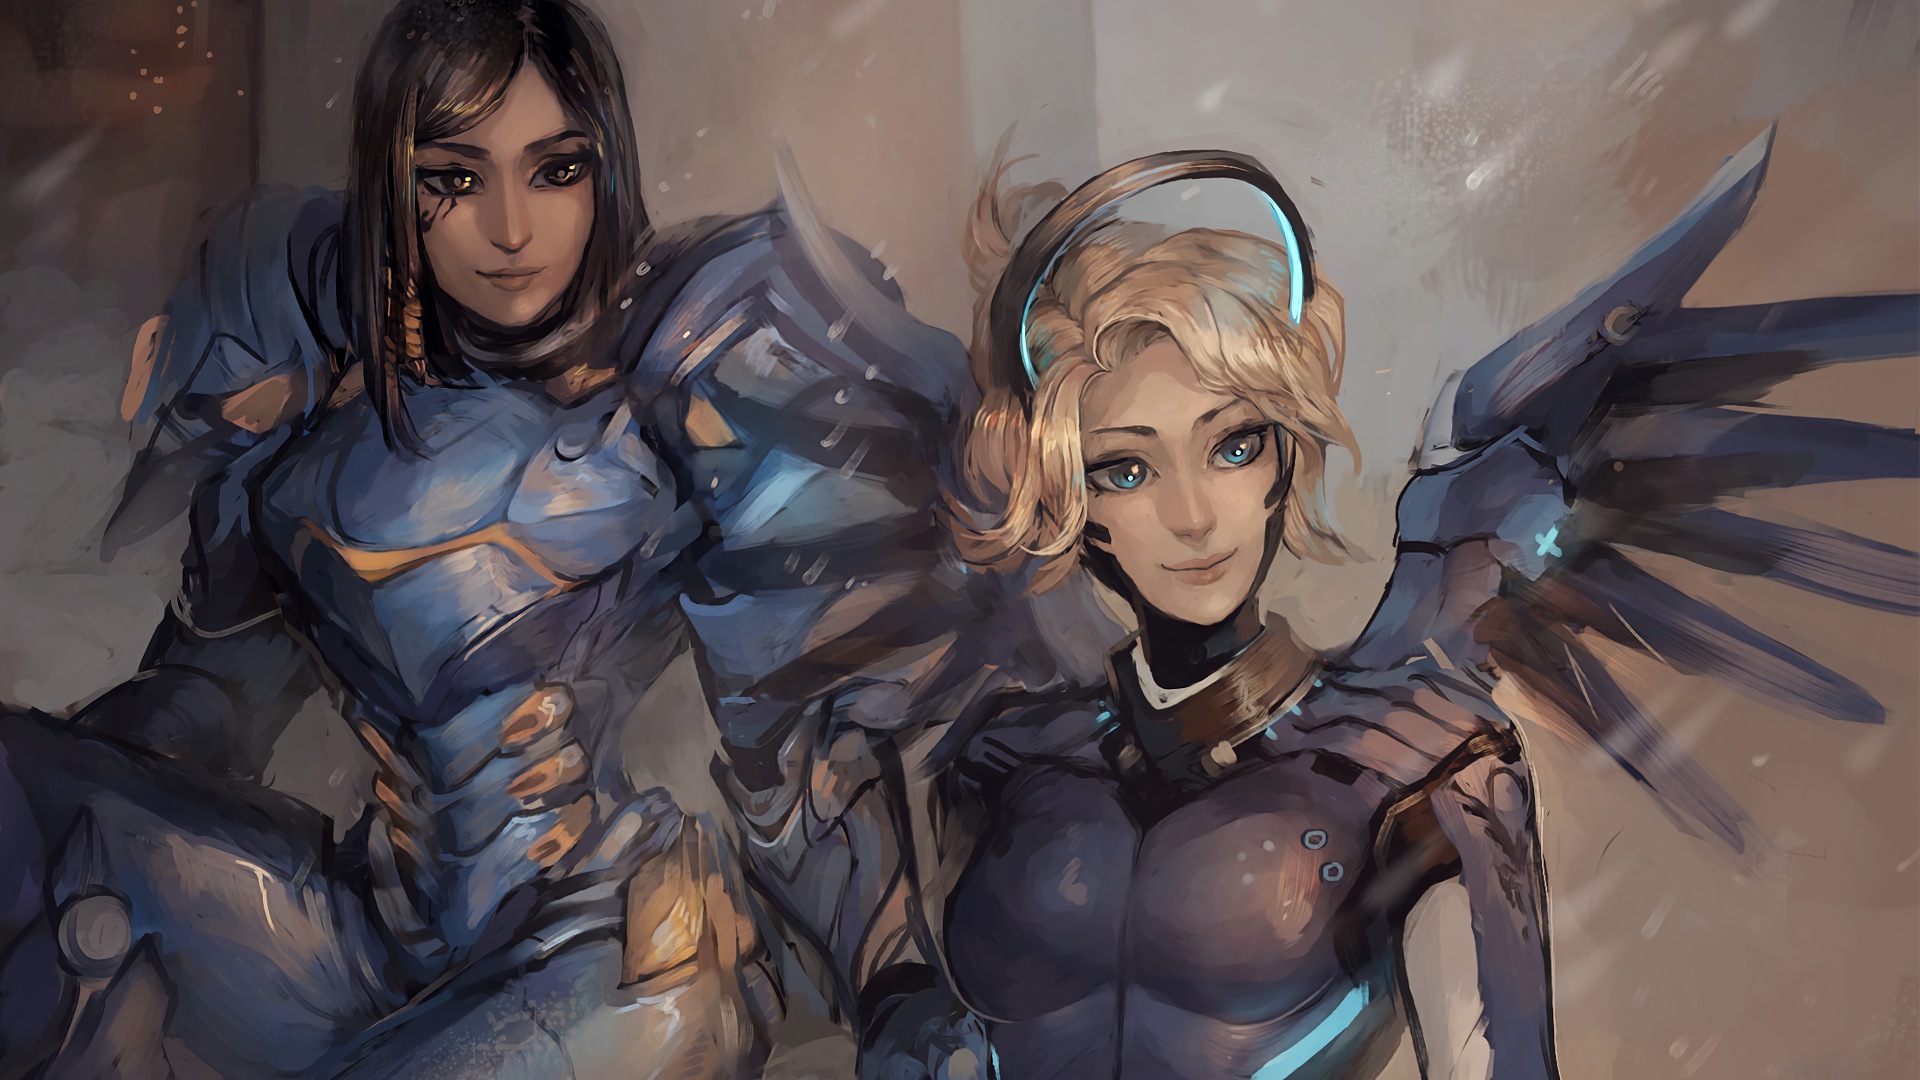 Overwatch Pharah And Mercy - HD Wallpaper 